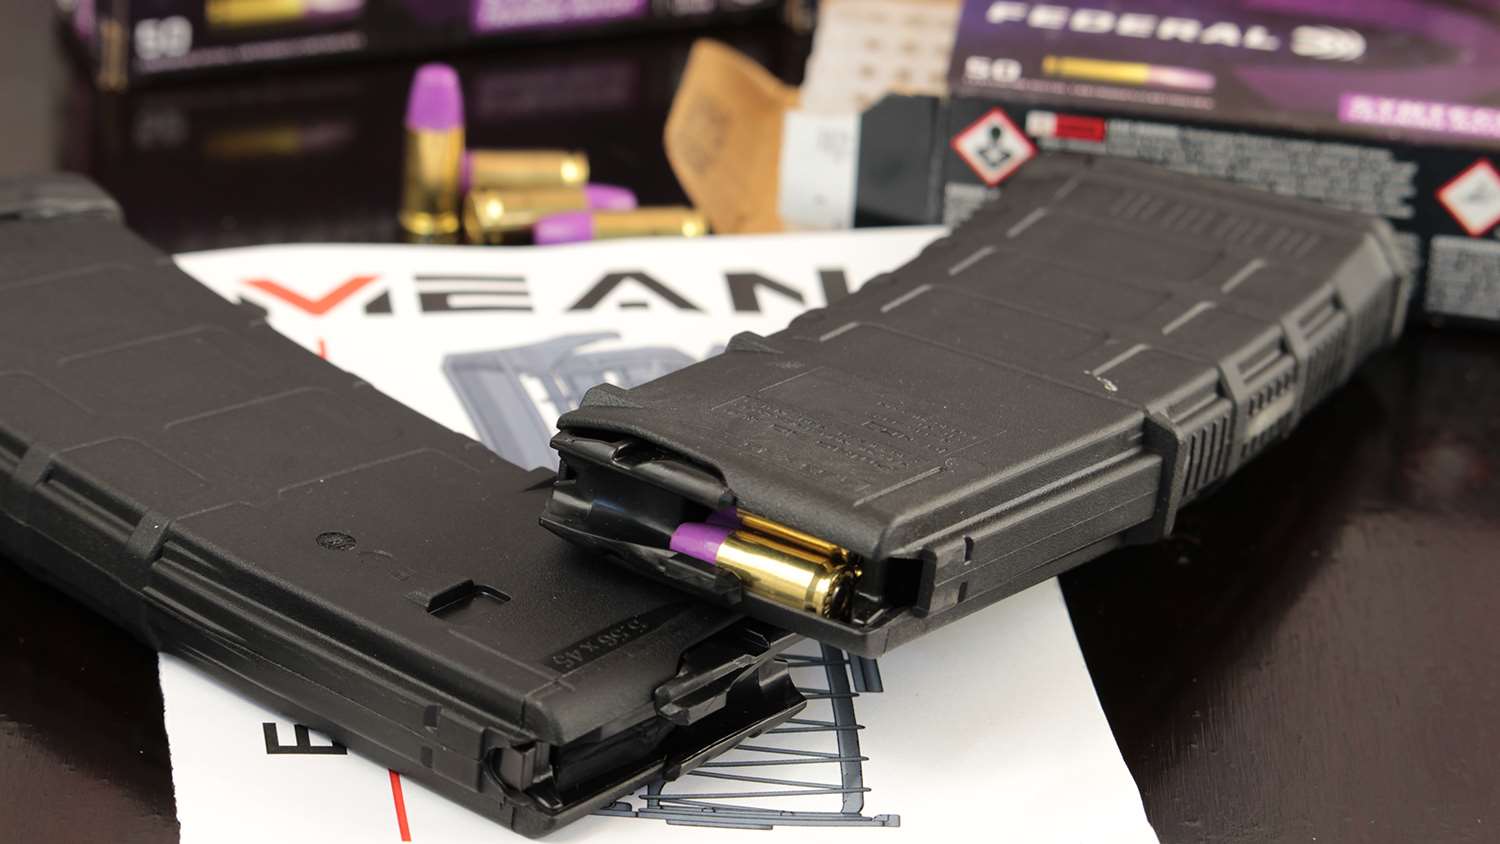 The Mean Arms Endomag allows you to use any lower with any 9mm upper, saving you half the investment on a new rifle. You can also use all of you AR-15 mag pouches and associated gear to cut down on the cost to try this new division.